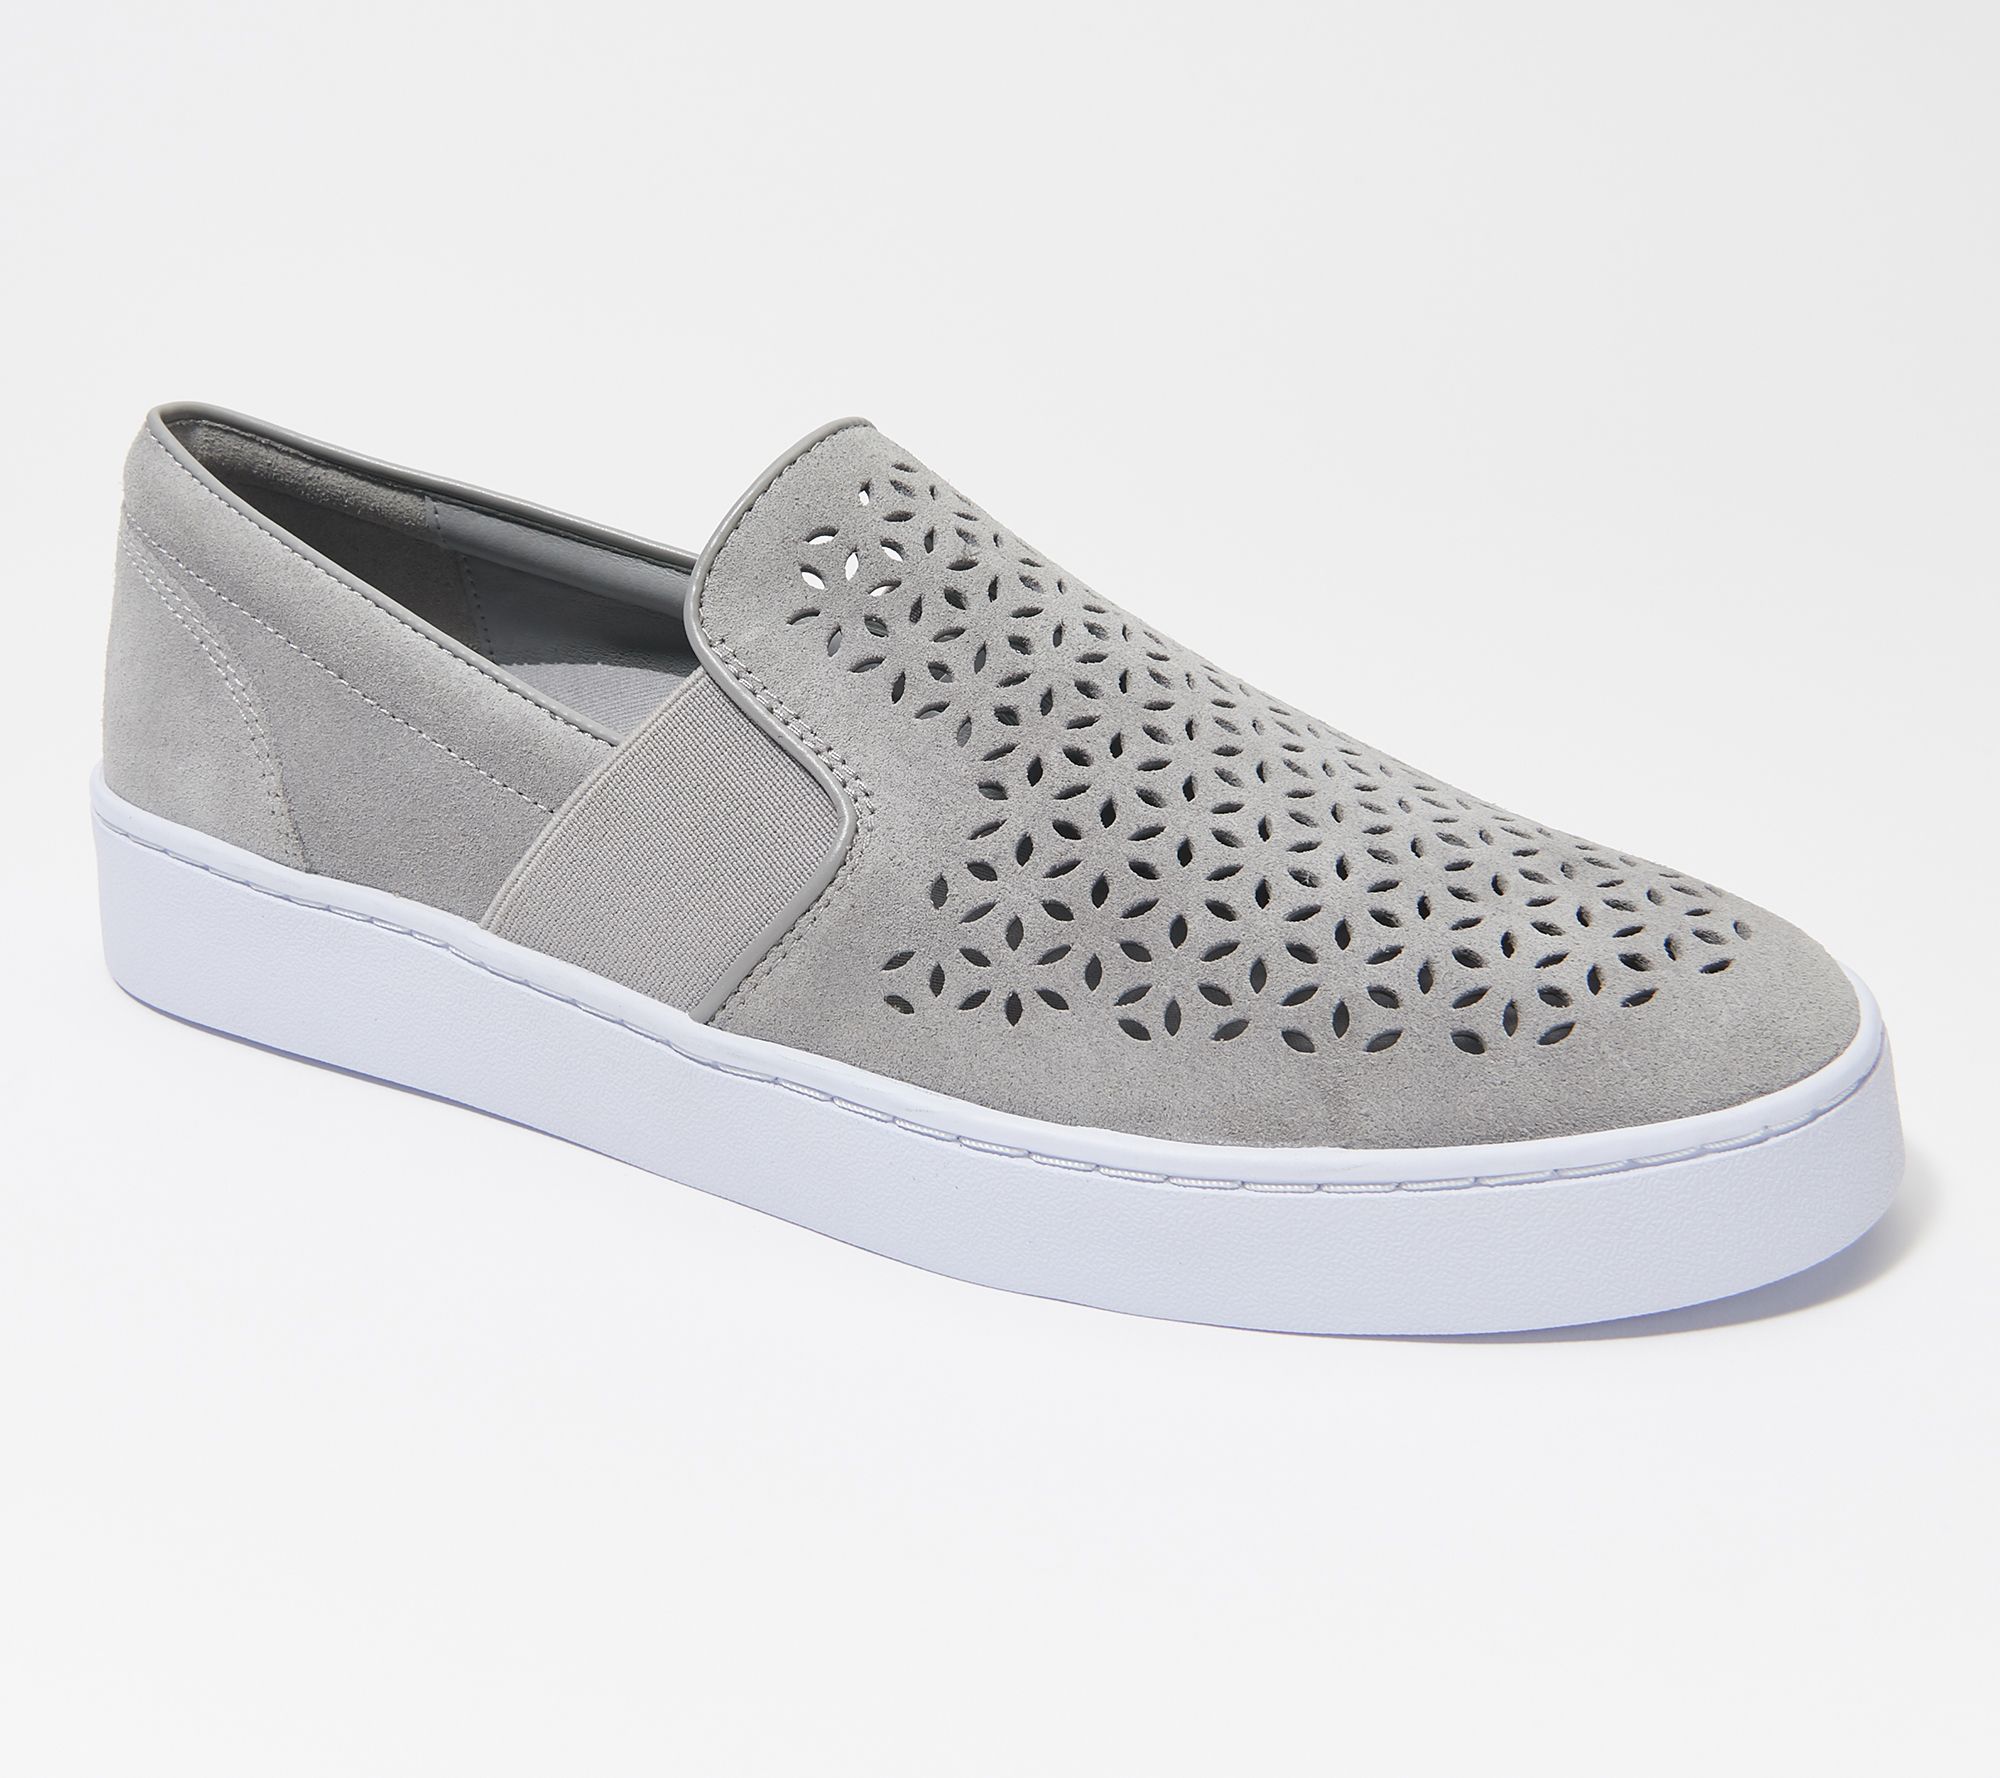 Vionic Suede Perforated Slip-On Sneakers - Kani - QVC.com